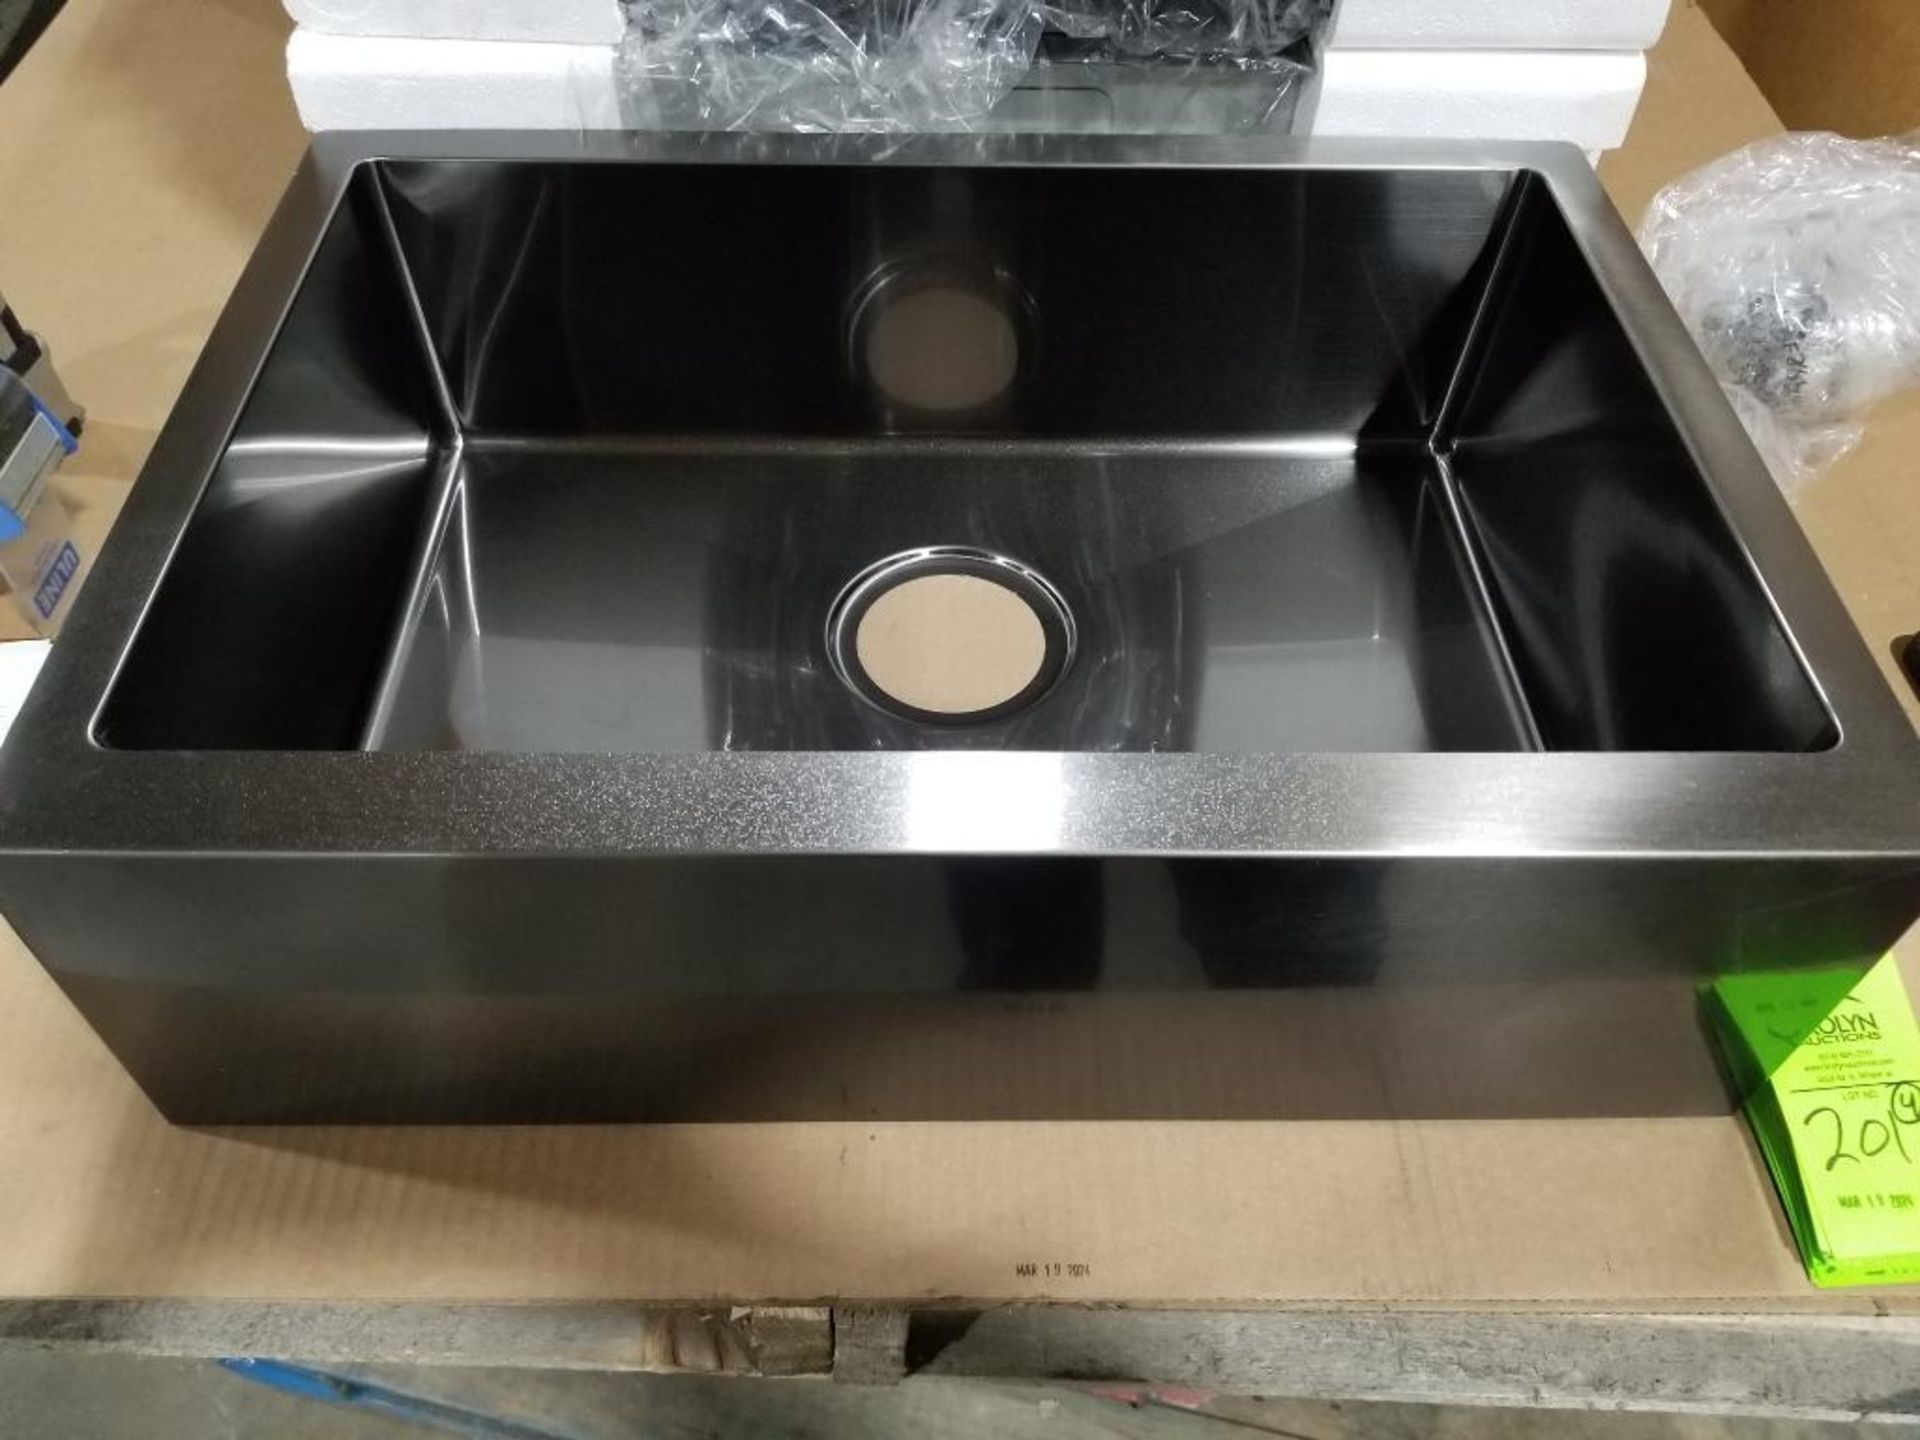 Qty 4 - Lippert black stainless steel apron style sink. 23in x 16in x 7in. - Image 2 of 4